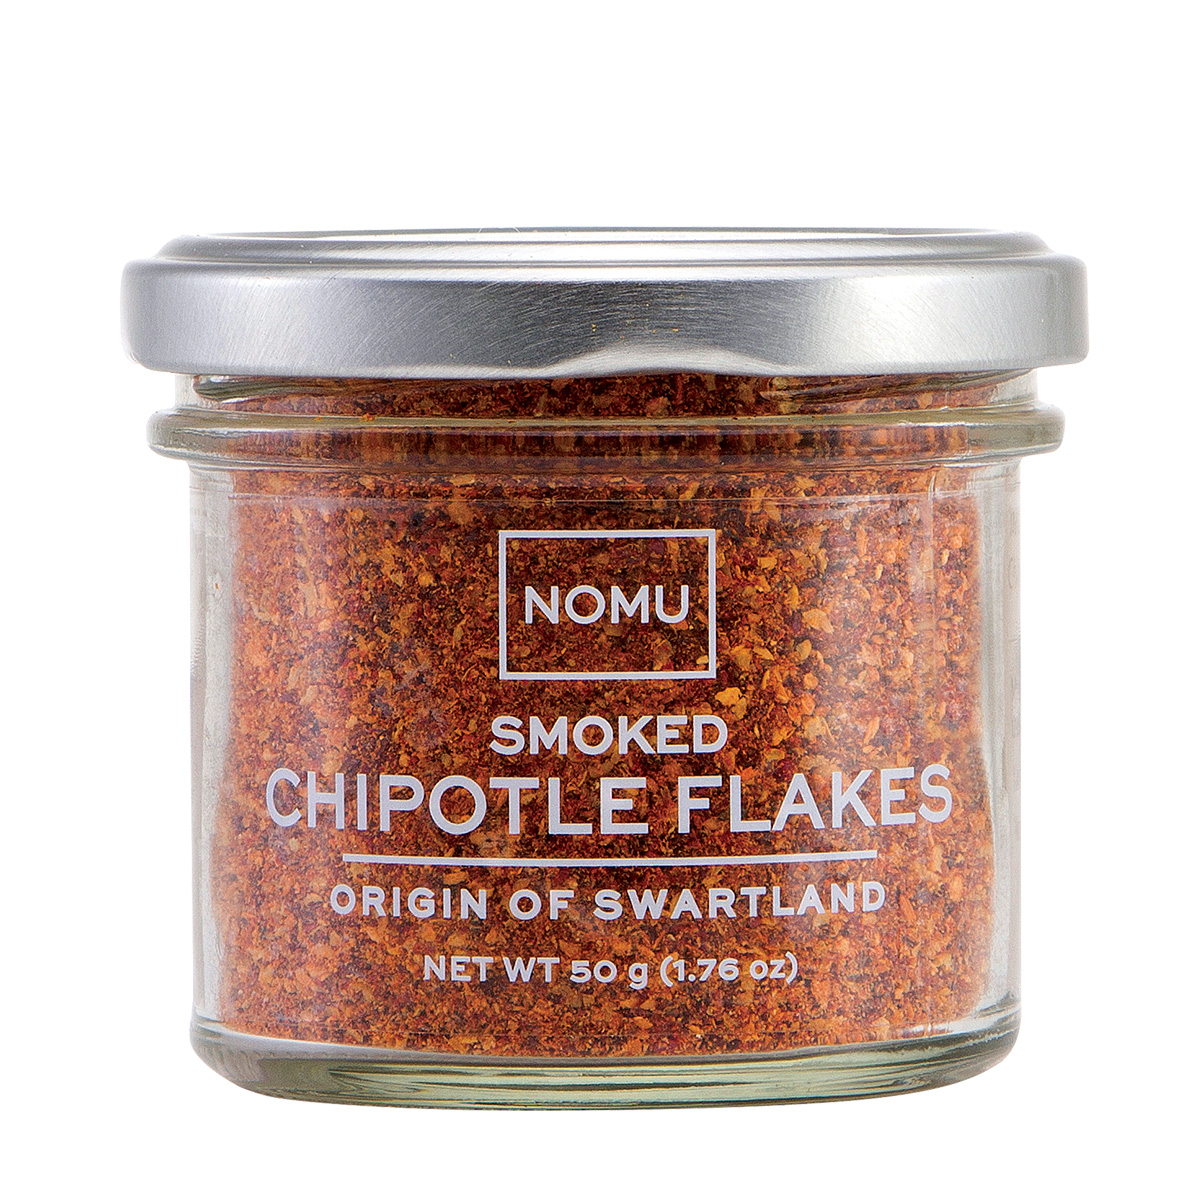 Cooks Collection Chipotle Flakes